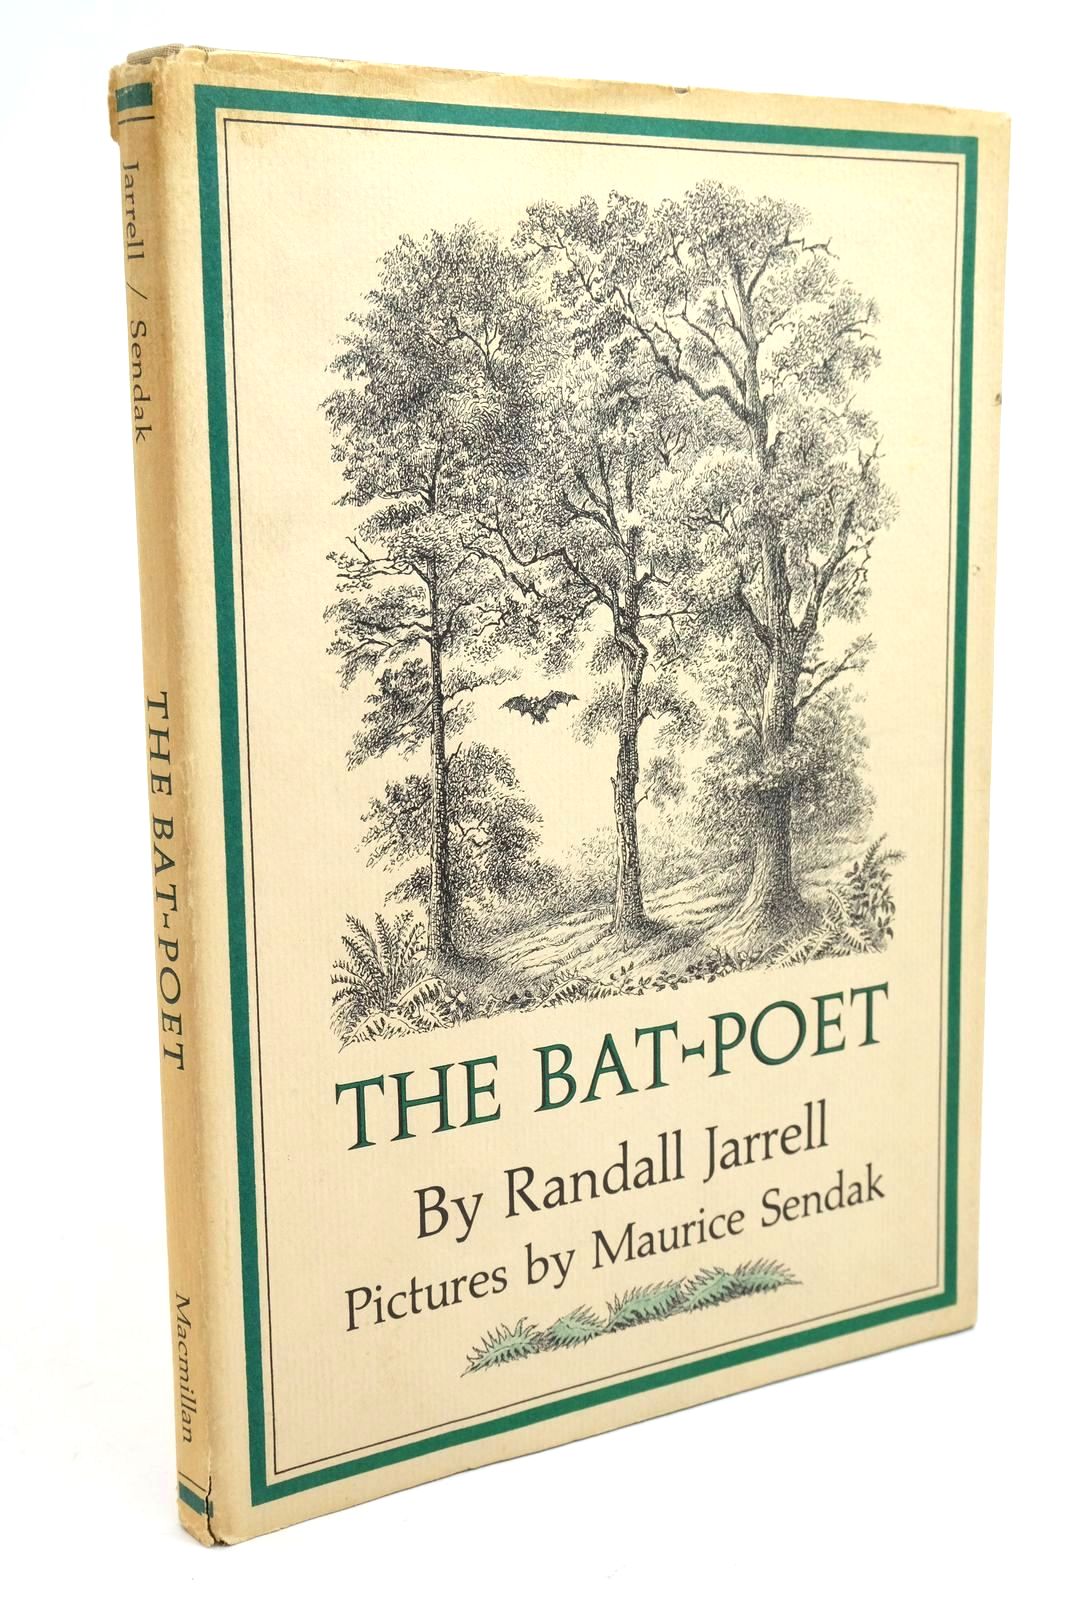 Photo of THE BAT-POET written by Jarrell, Randall illustrated by Sendak, Maurice published by The Macmillan Company (STOCK CODE: 1322210)  for sale by Stella & Rose's Books